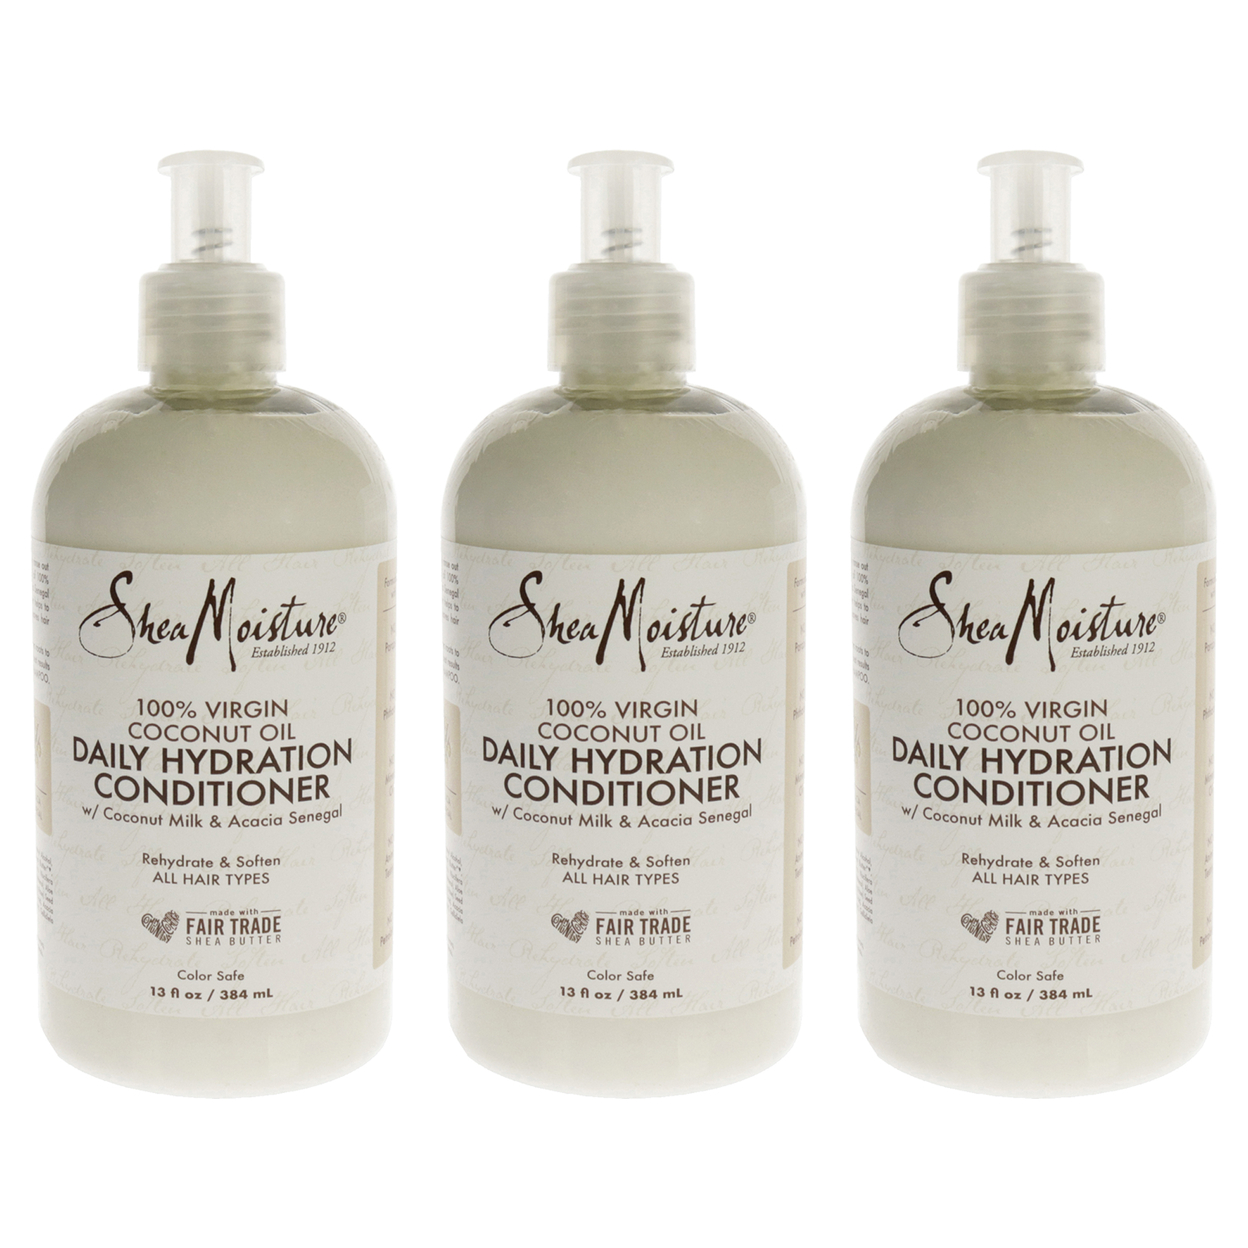 Shea Moisture 100 Percent Virgin Coconut Oil Daily Hydration Conditioner - Pack Of 3 Conditioner 13 Oz